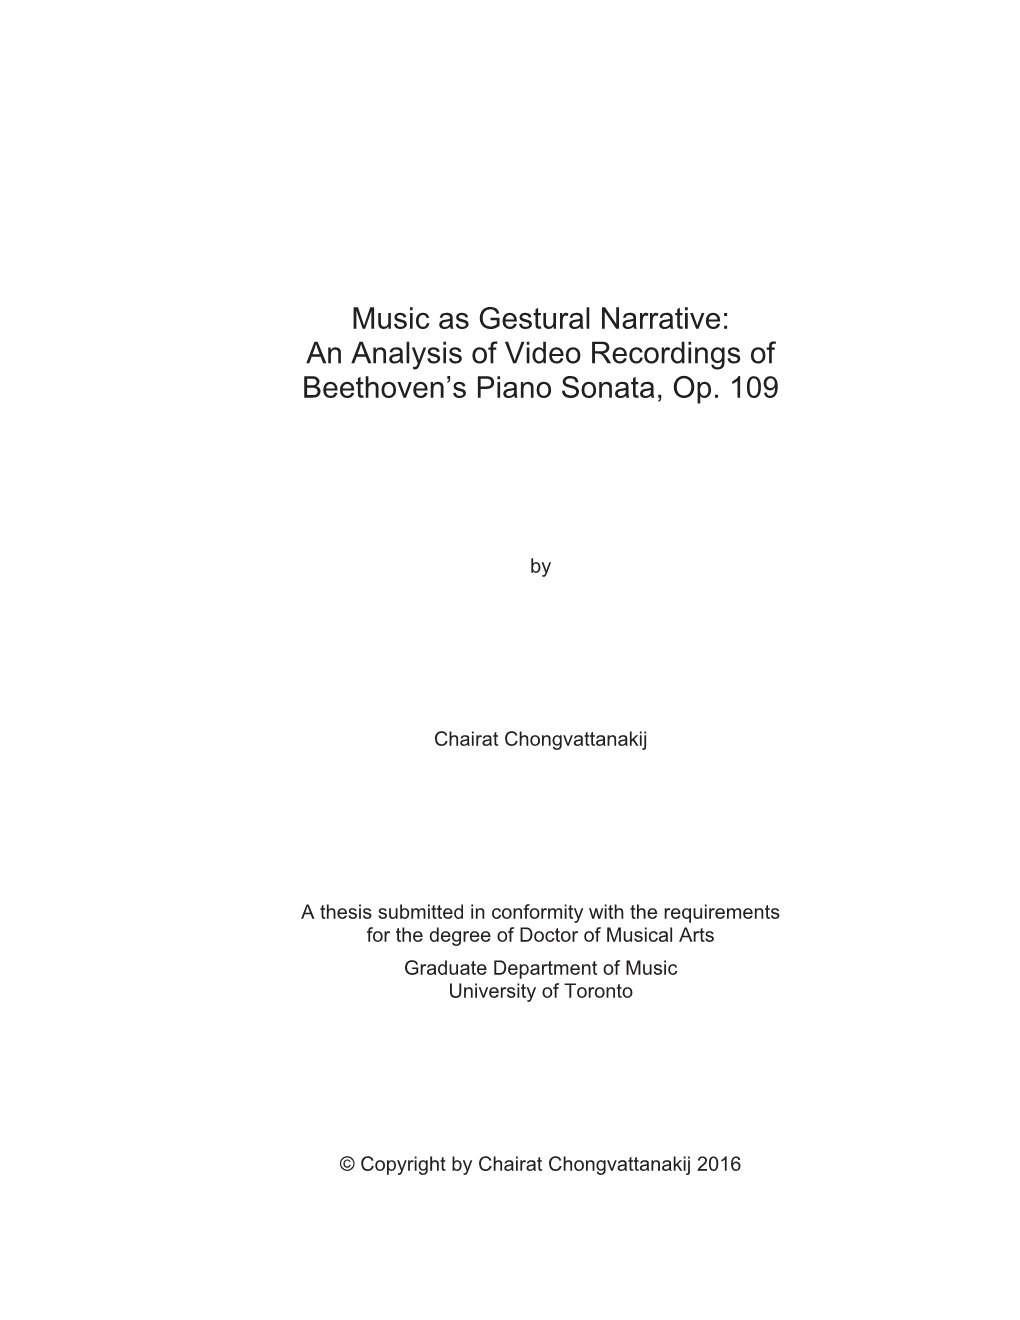 Music As Gestural Narrative: an Analysis of Video Recordings of Beethoven's Piano Sonata, Op